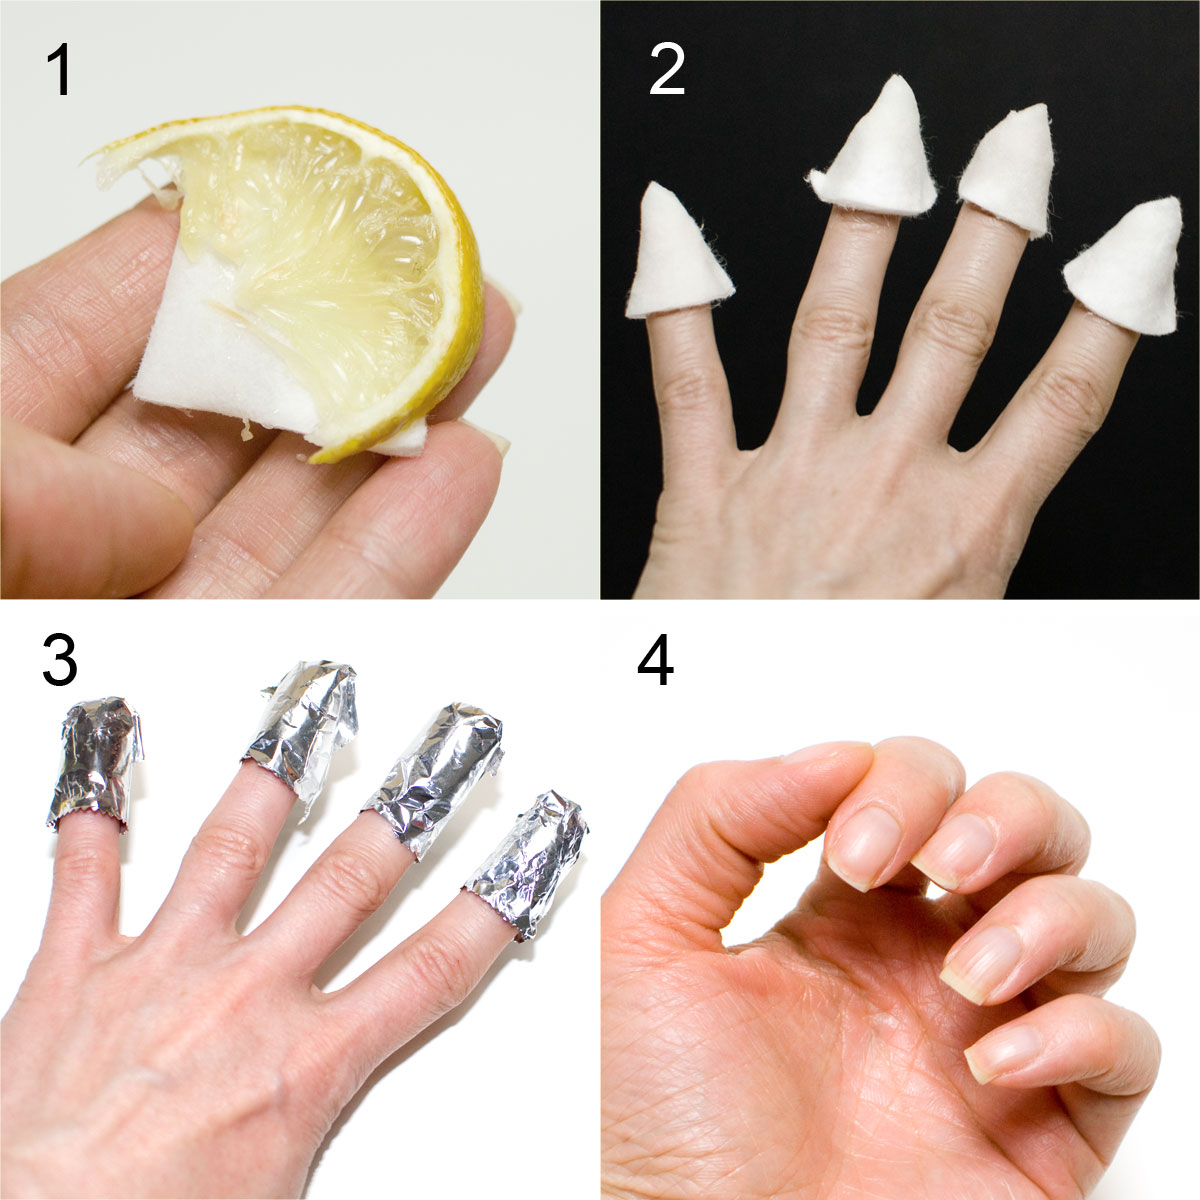 How to whiten your nails - My Nail Polish Online